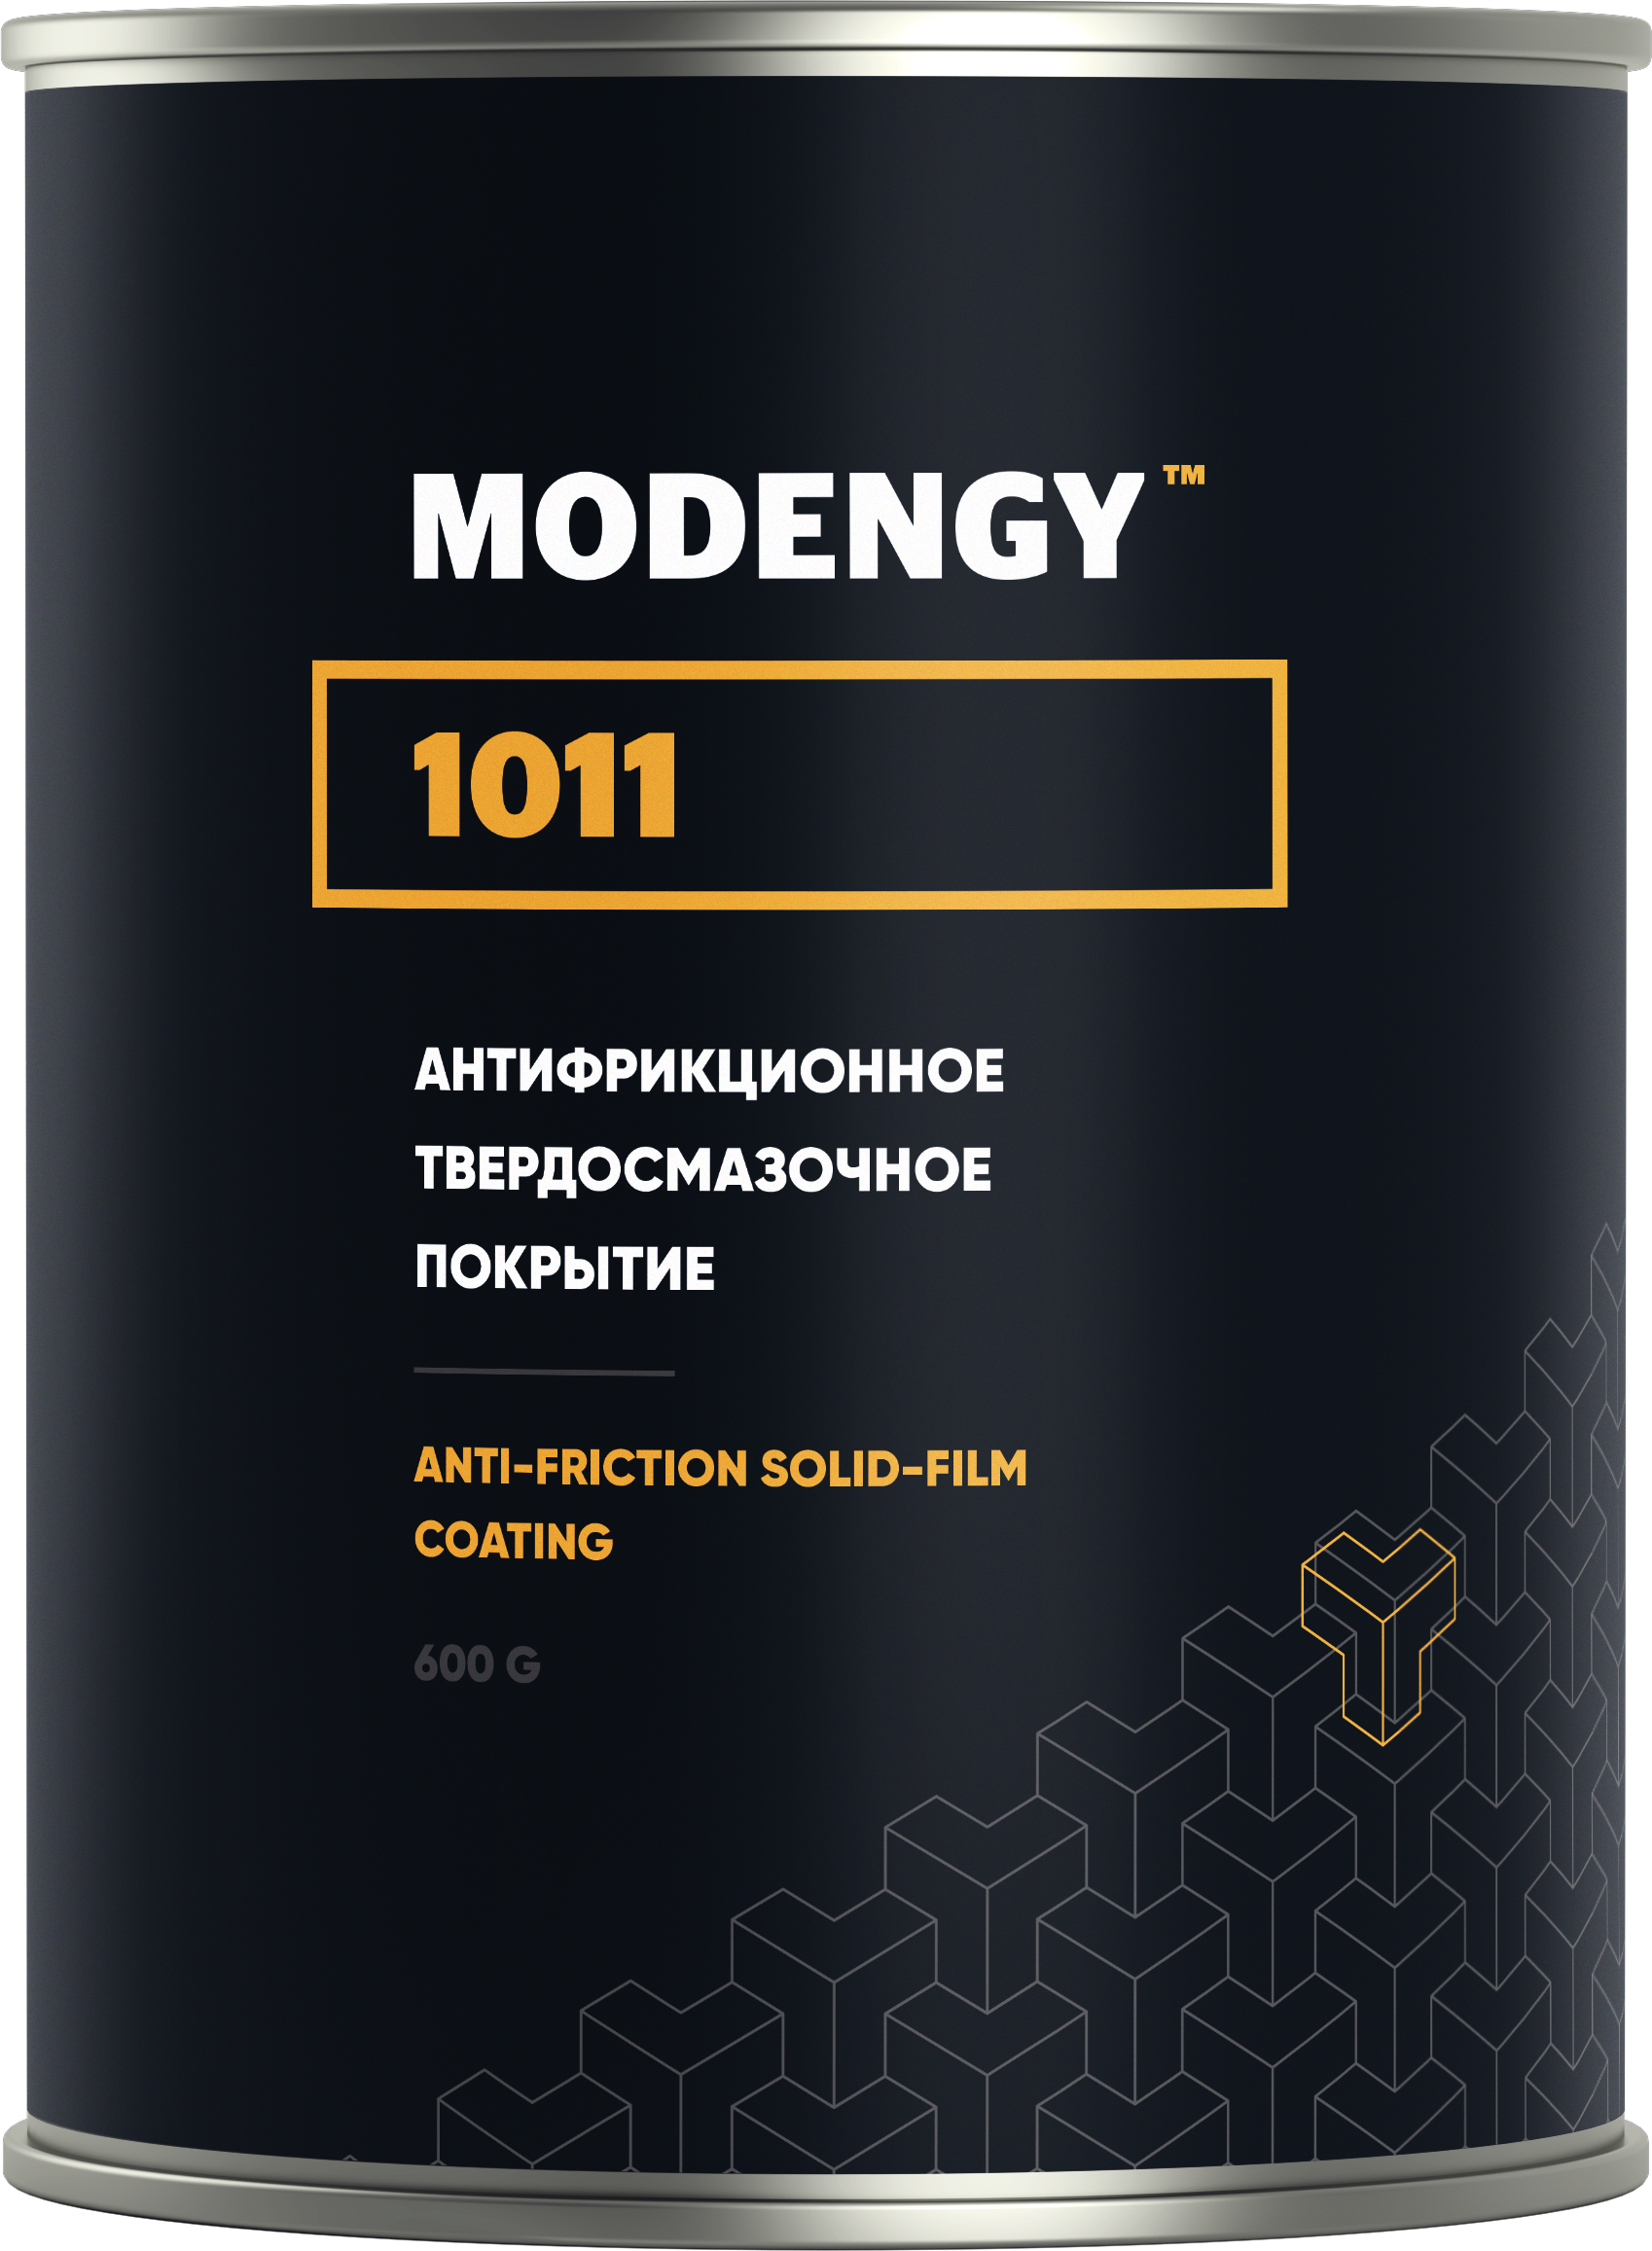 MODENGY 1011